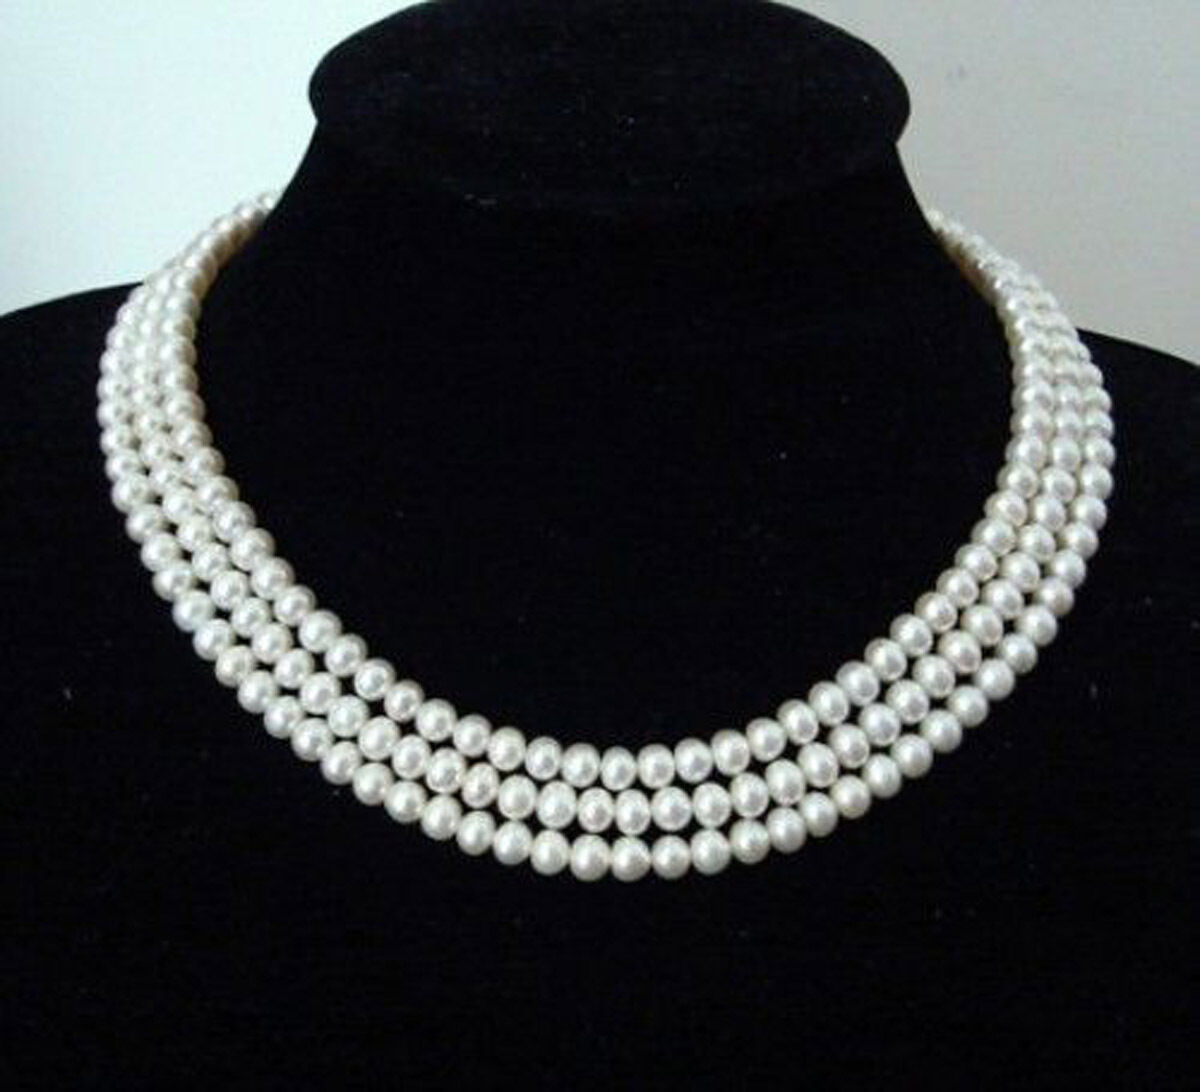 Genuine natural 3 Rows 8-9mm White Akoya Cultured Pearl Necklace 17-19 inches